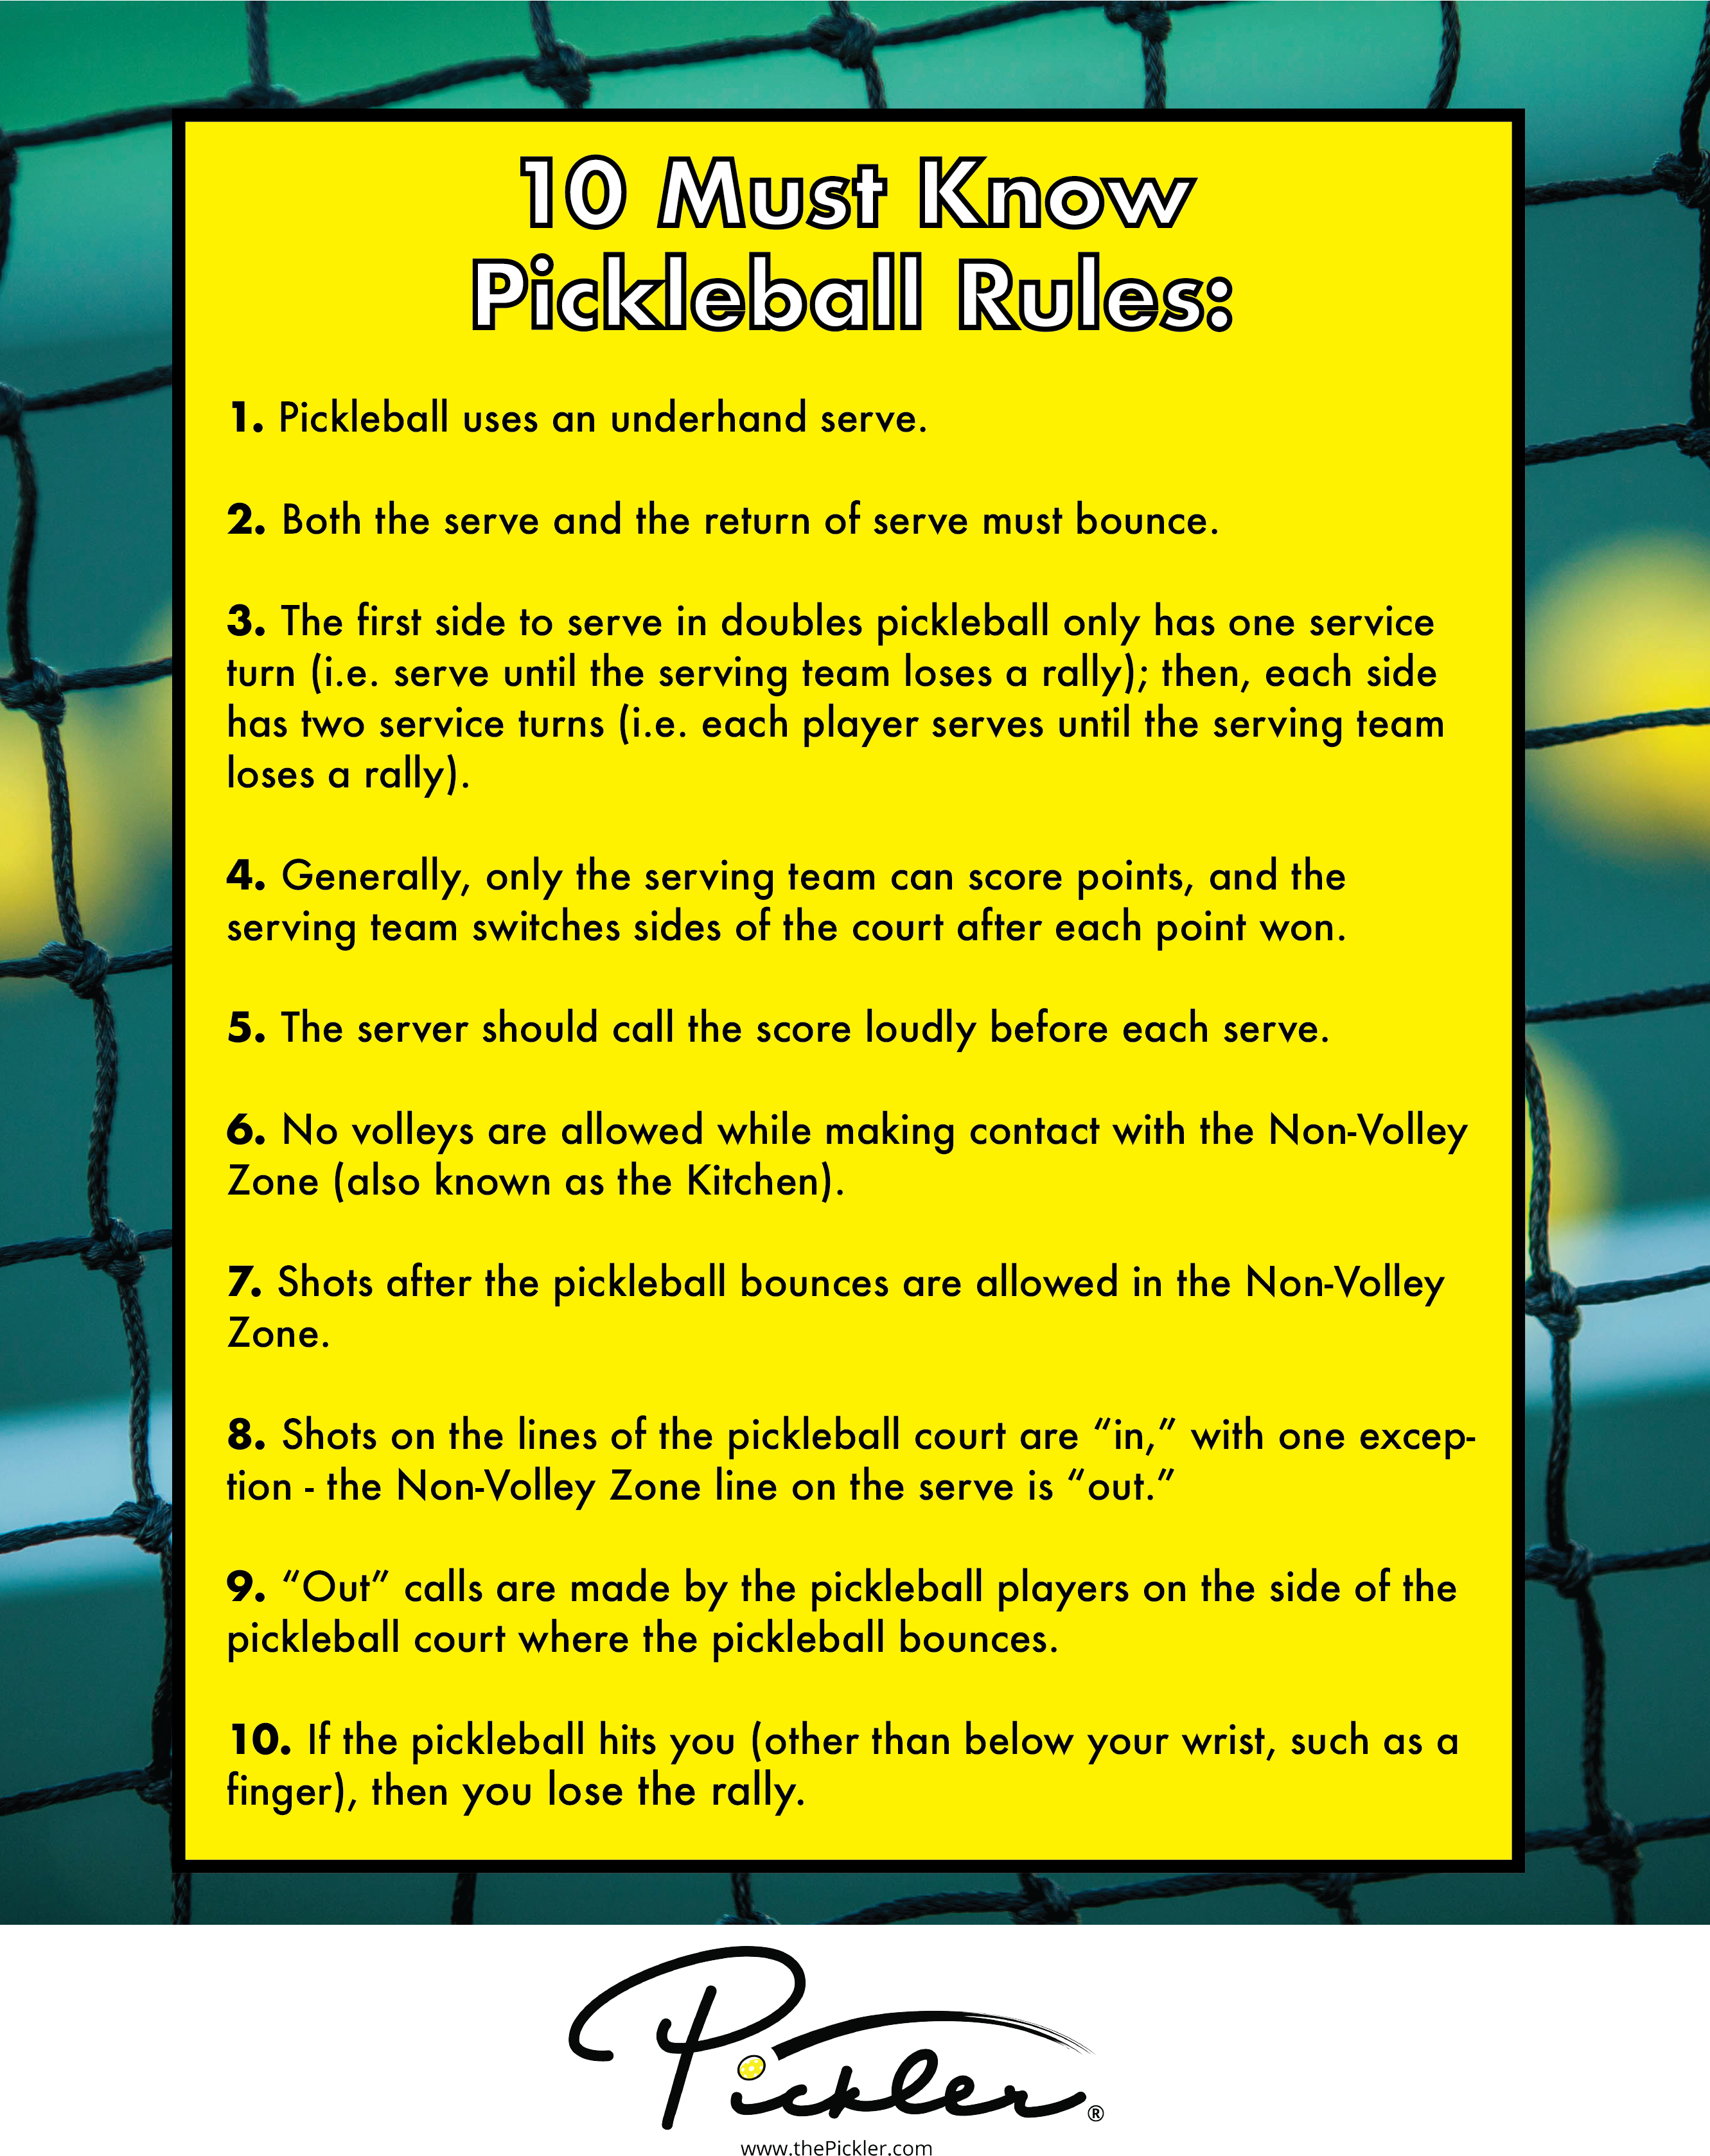 10 Must Know Pickleball Rules Before You Hit the Court | Pickler Pickleball